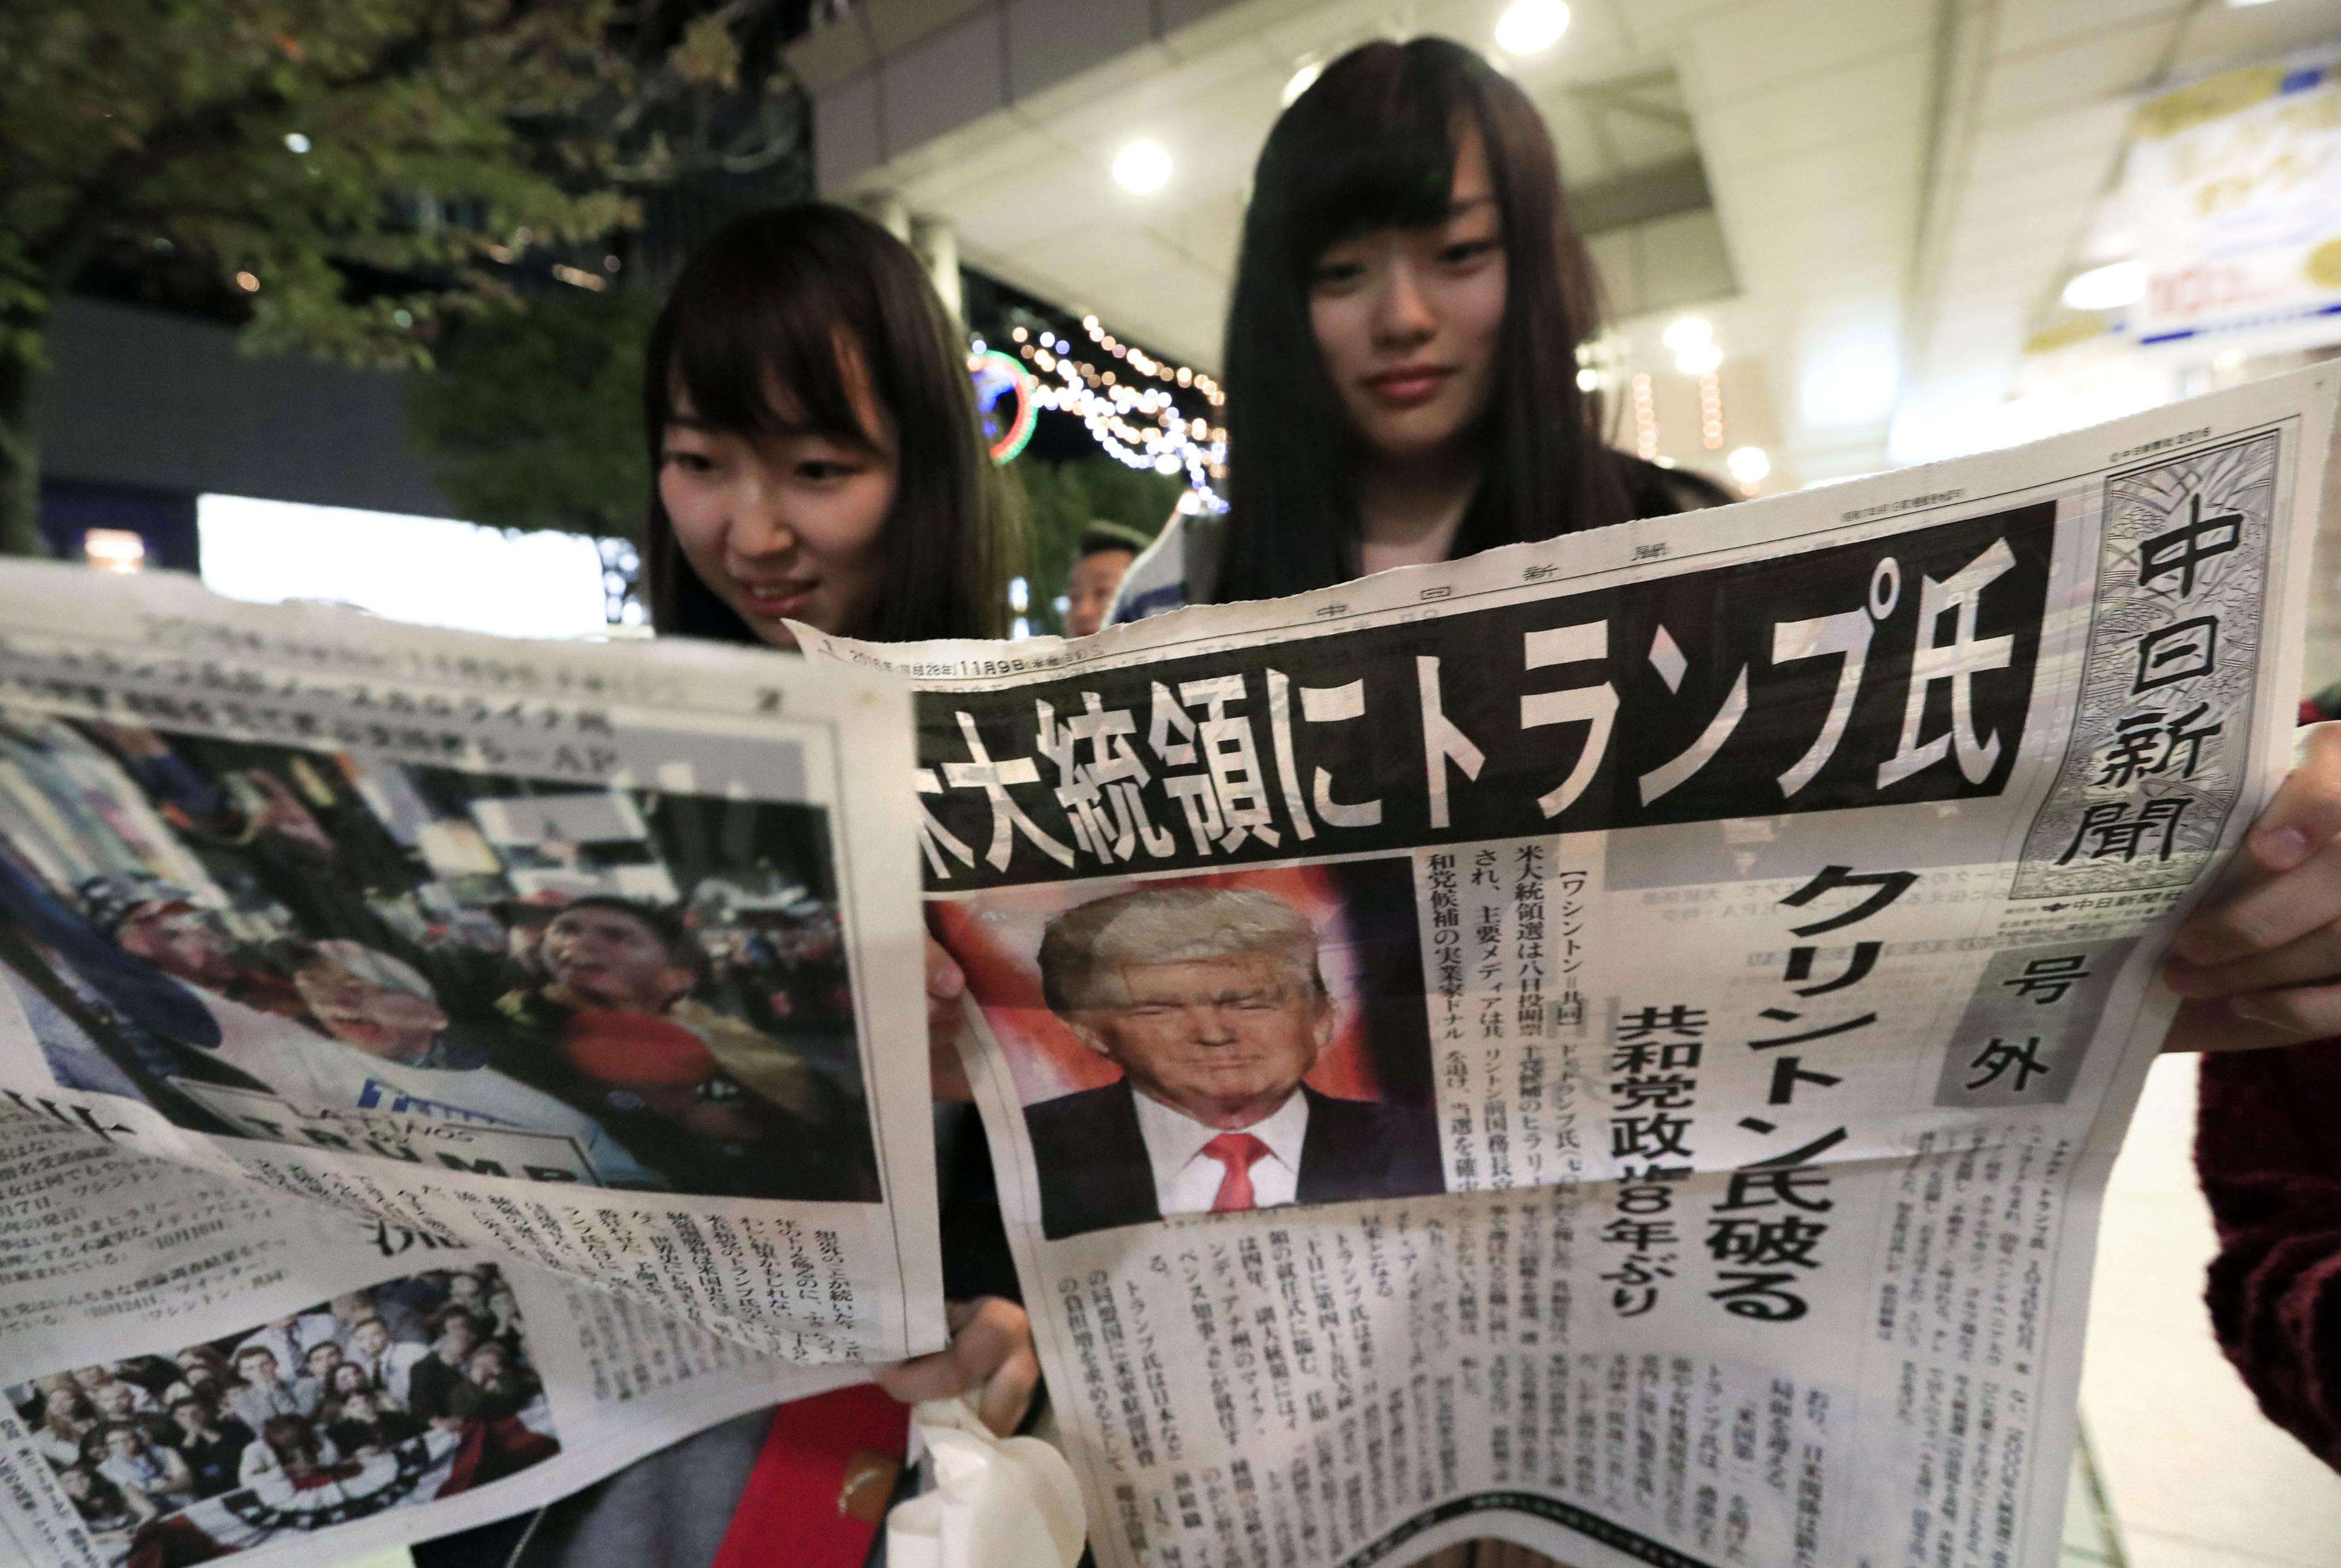 Women read about Donald Trump’s victory in the US presidential election, in Nagoya in central Japan on Wednesday. Photo: Kyodo